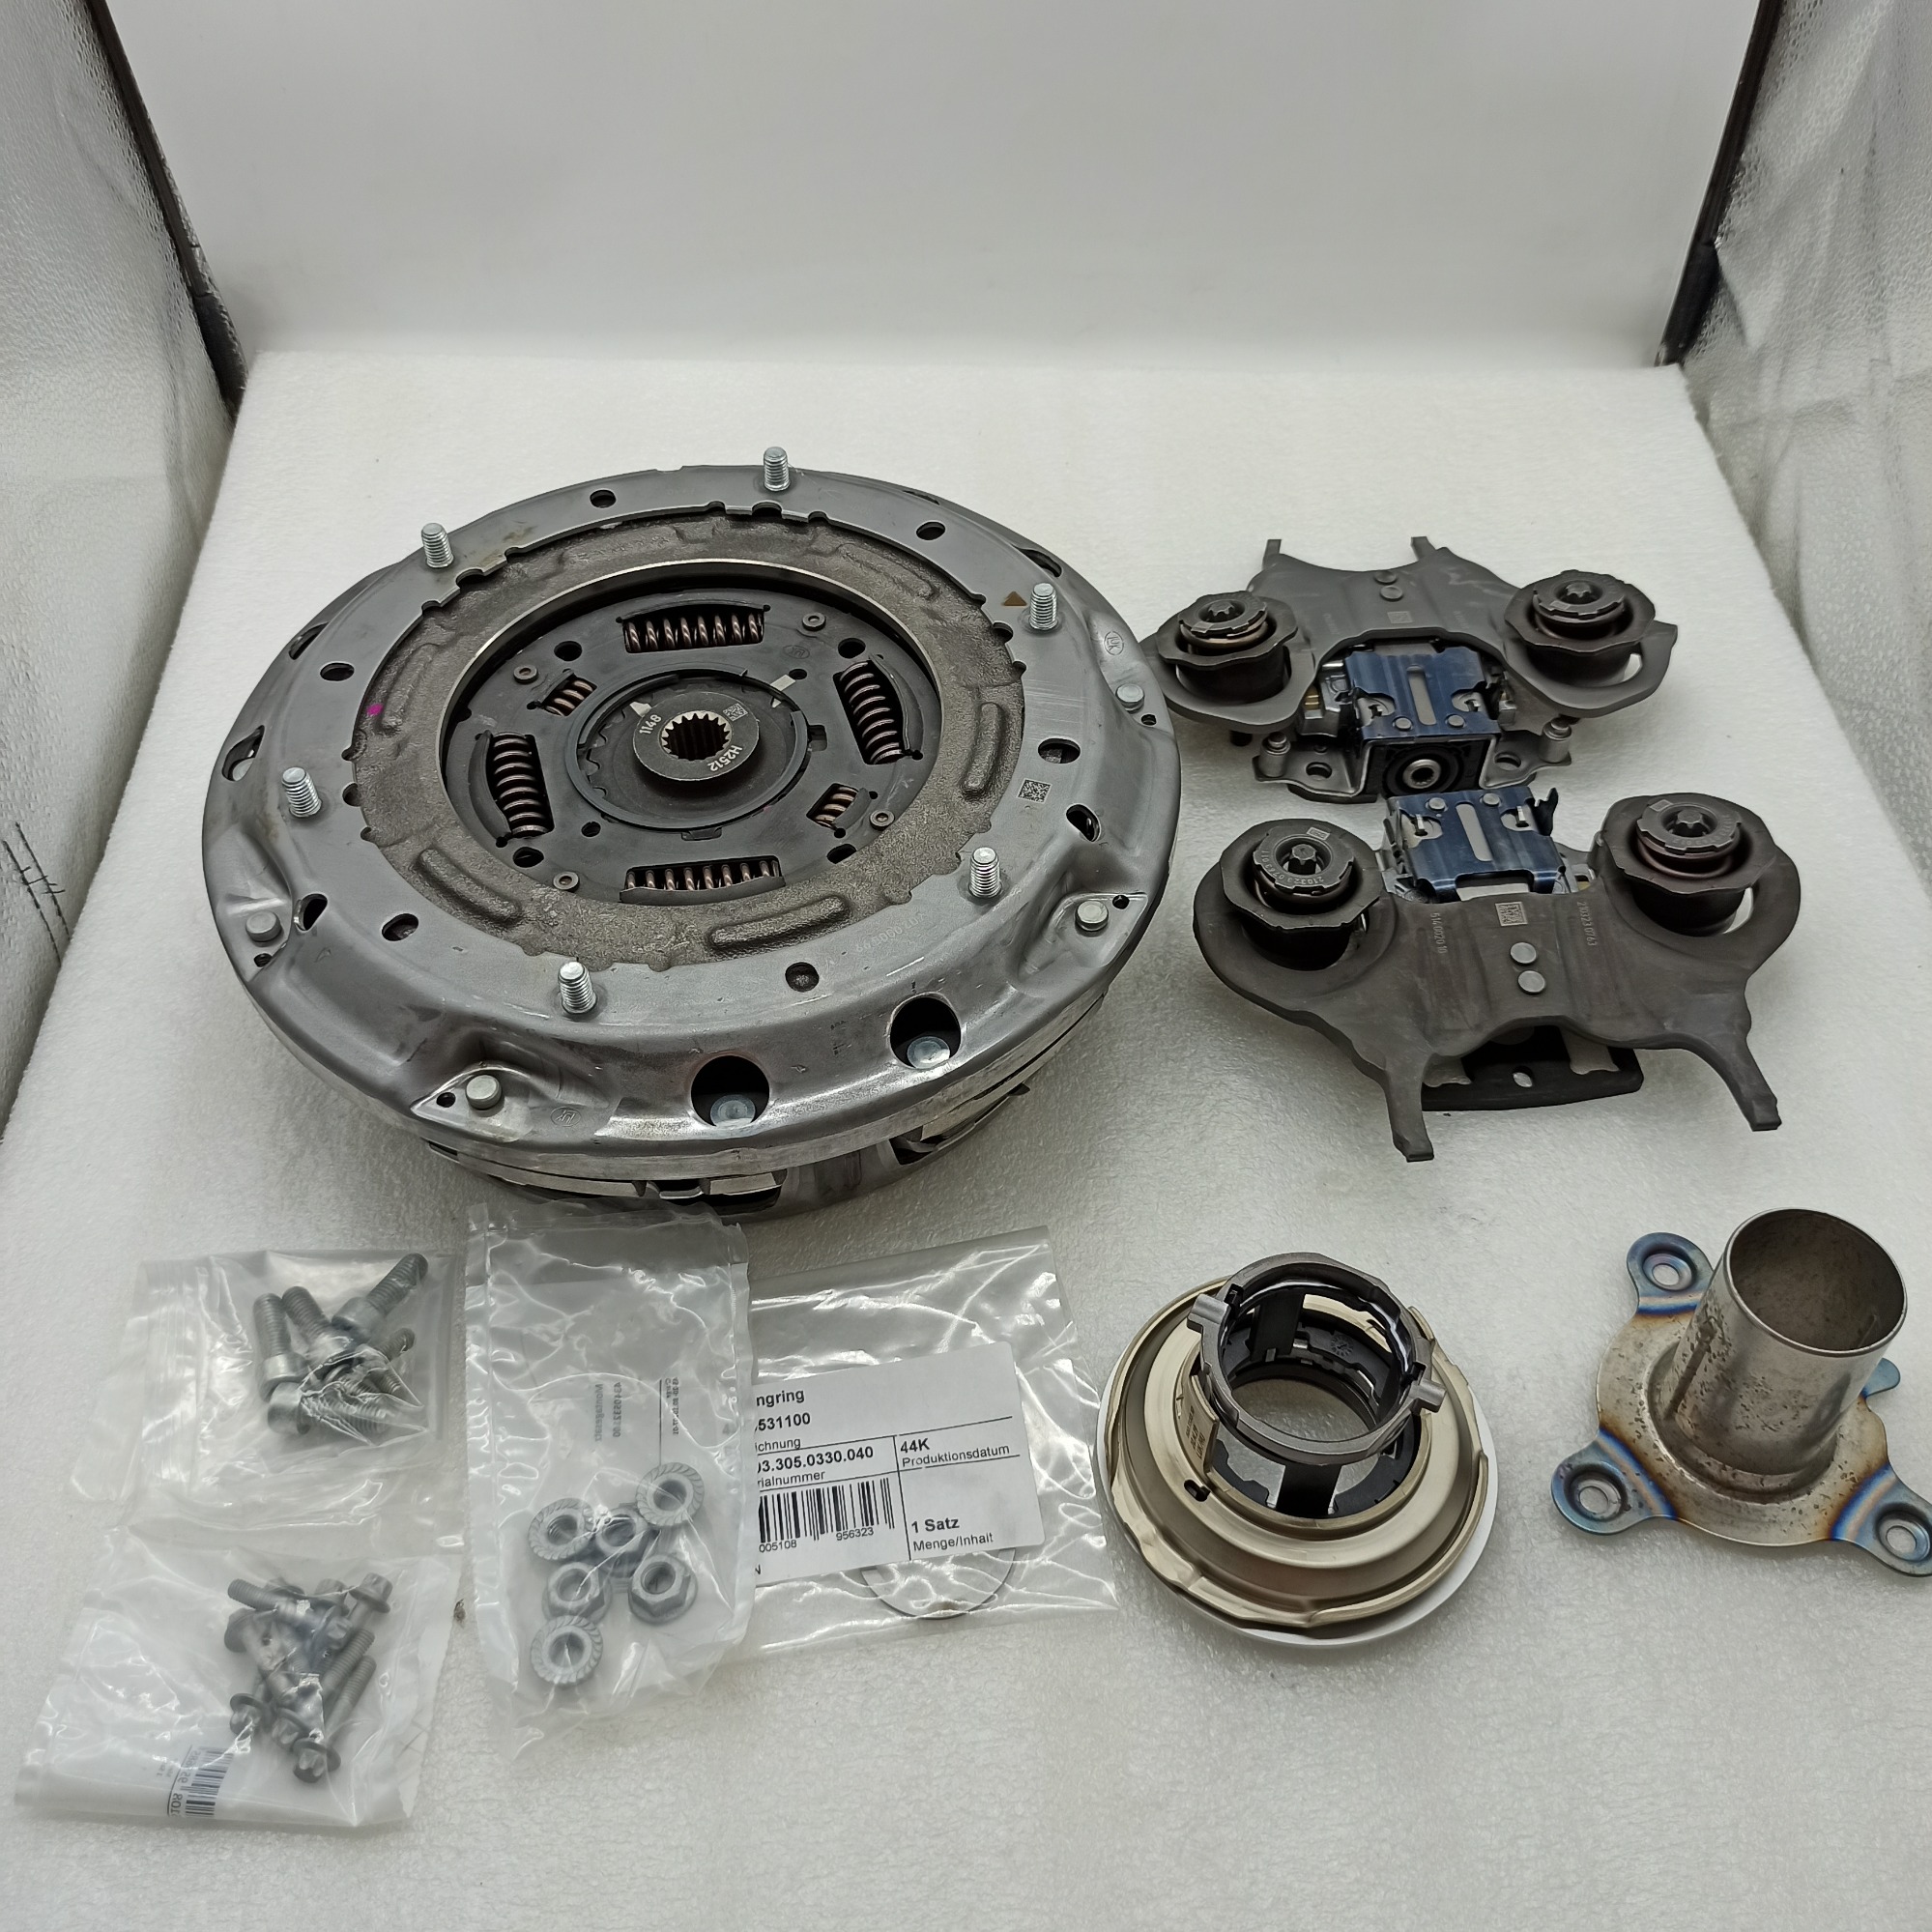 DPS6-0013-OEM DPS6 6DCT250 clutch assy OEM LUK with fork bearing